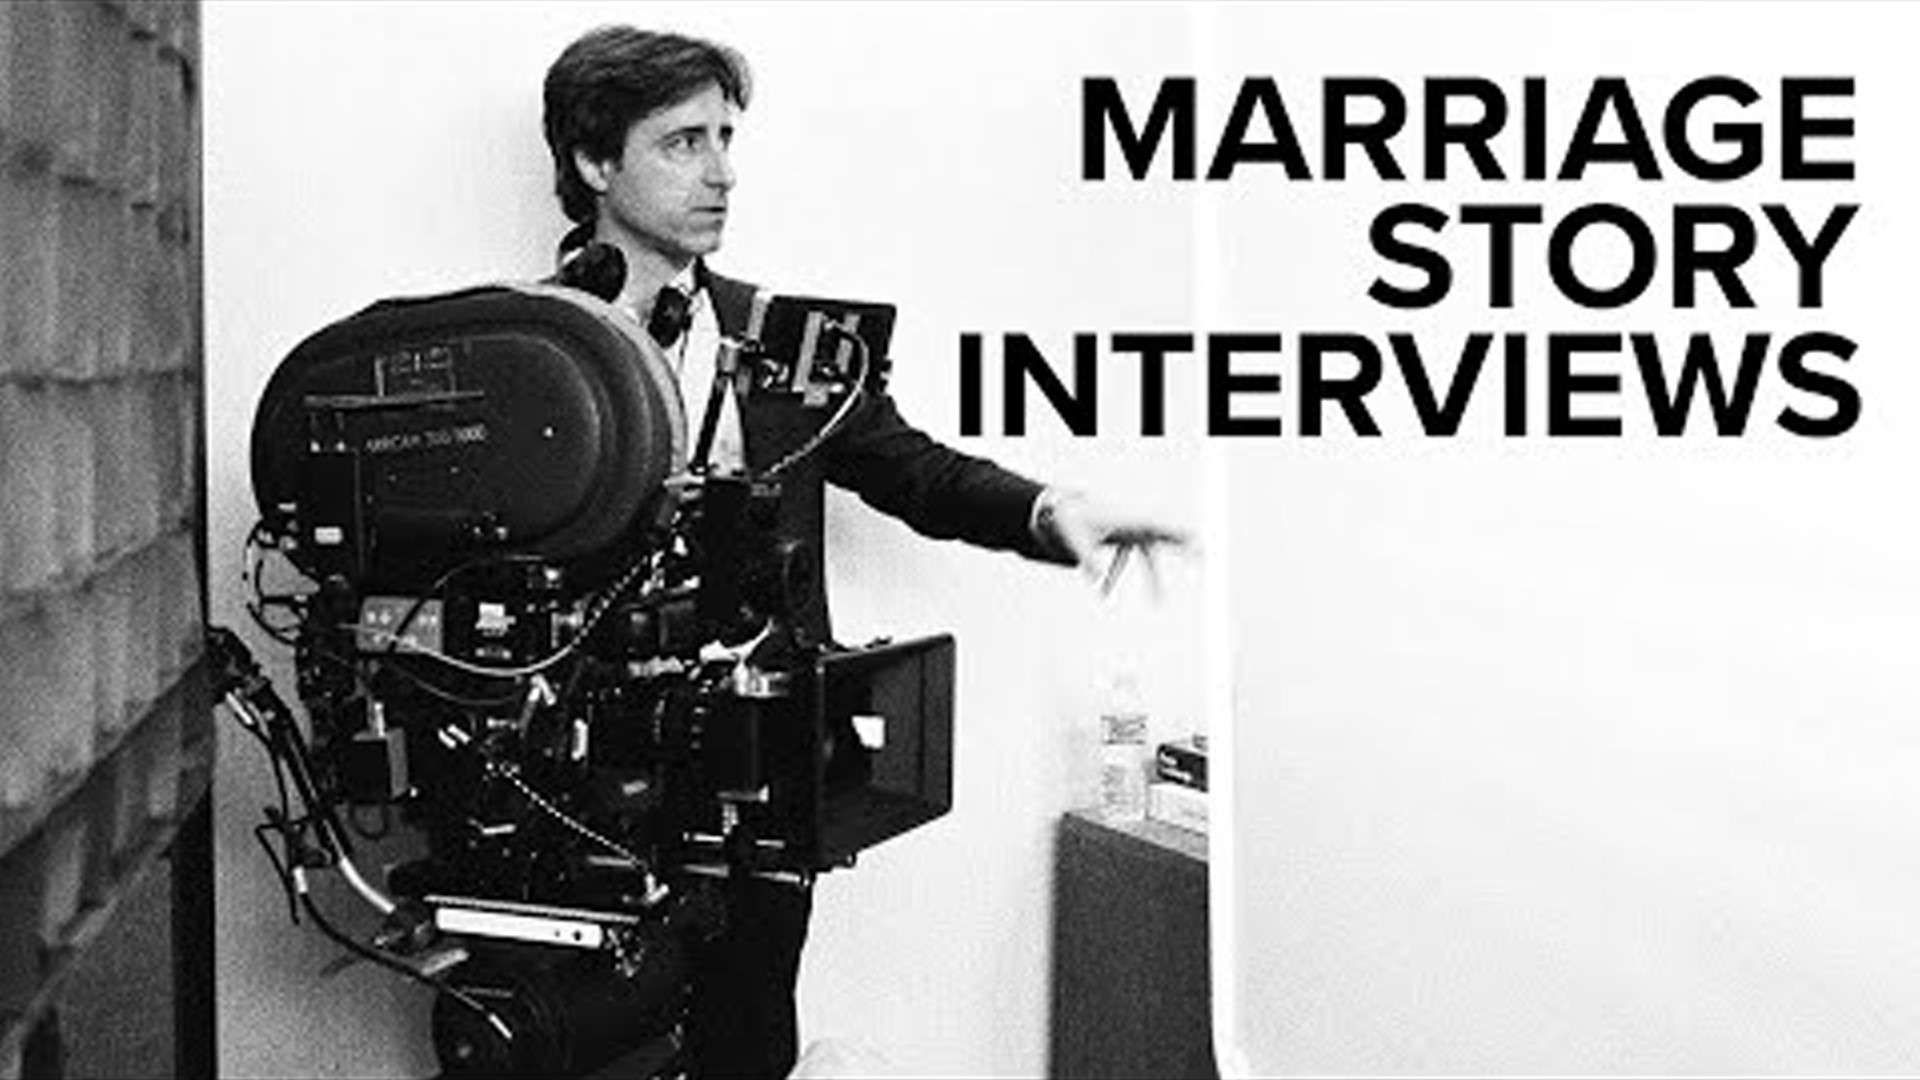 The cast of the movie 'Marriage Story' talks about the story of finding love through divorce. Interviews include Laura Dern, Noah Baumbach, and Julie Hagerty.